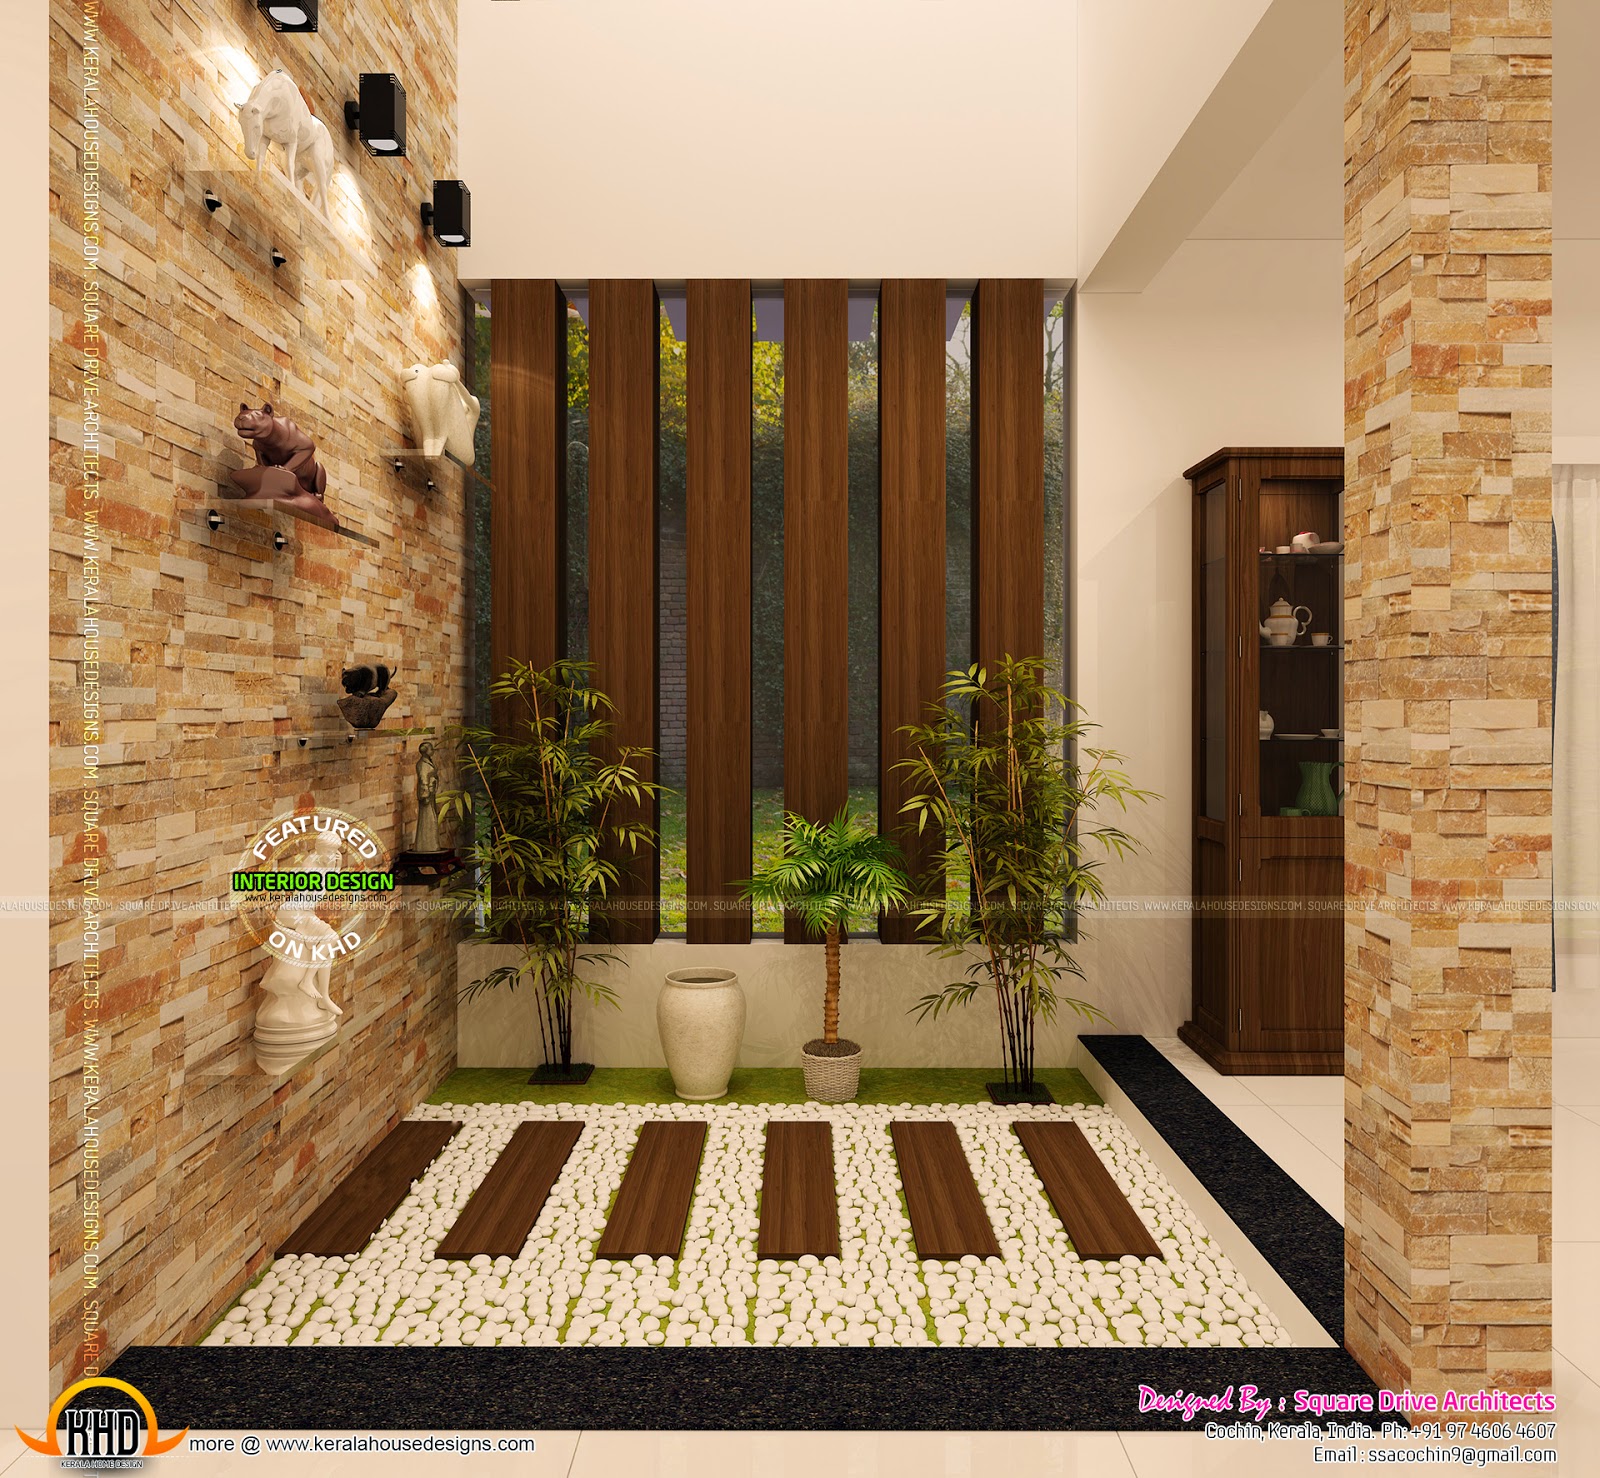 Home interiors designs - Kerala home design and floor plans - 8000+ houses